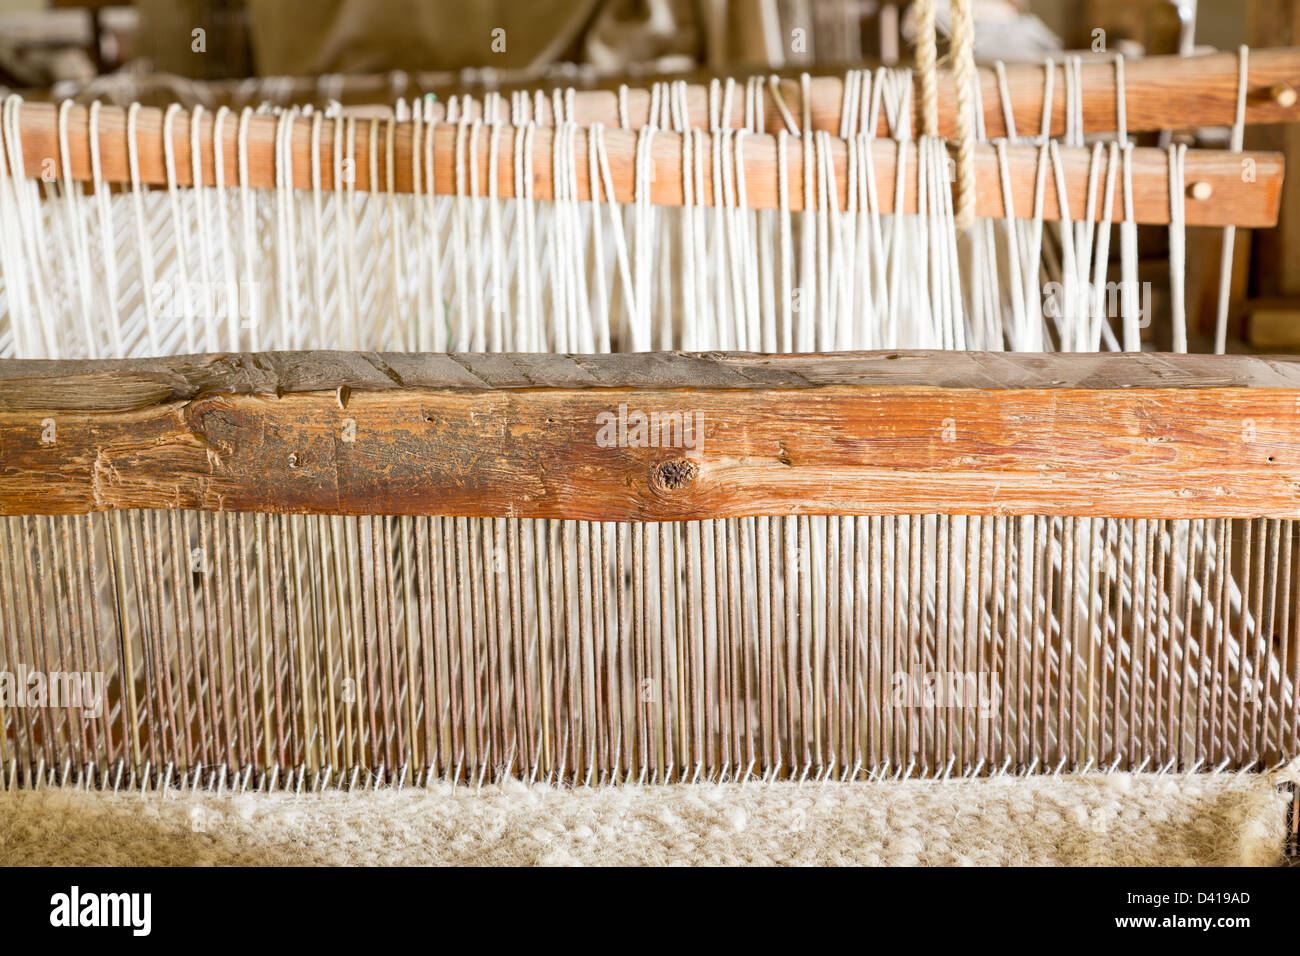 Old weaving loom made from timber making cloth in La Purisima mission California Stock Photo